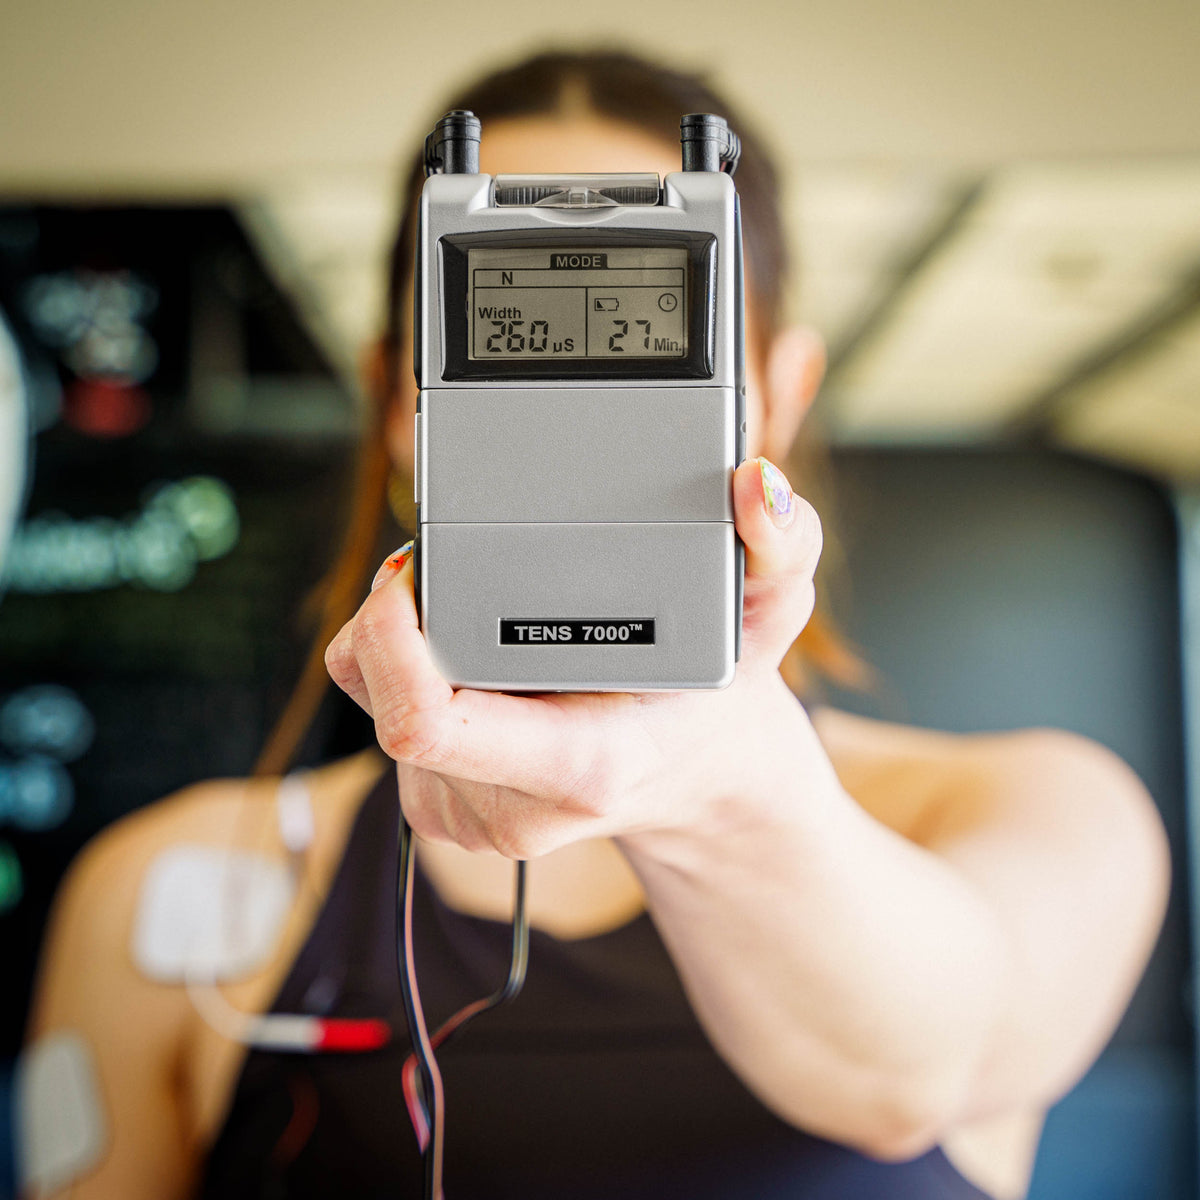 A close up of the TENS 7000 Rechargeable TENS Unit being held with a blurry background